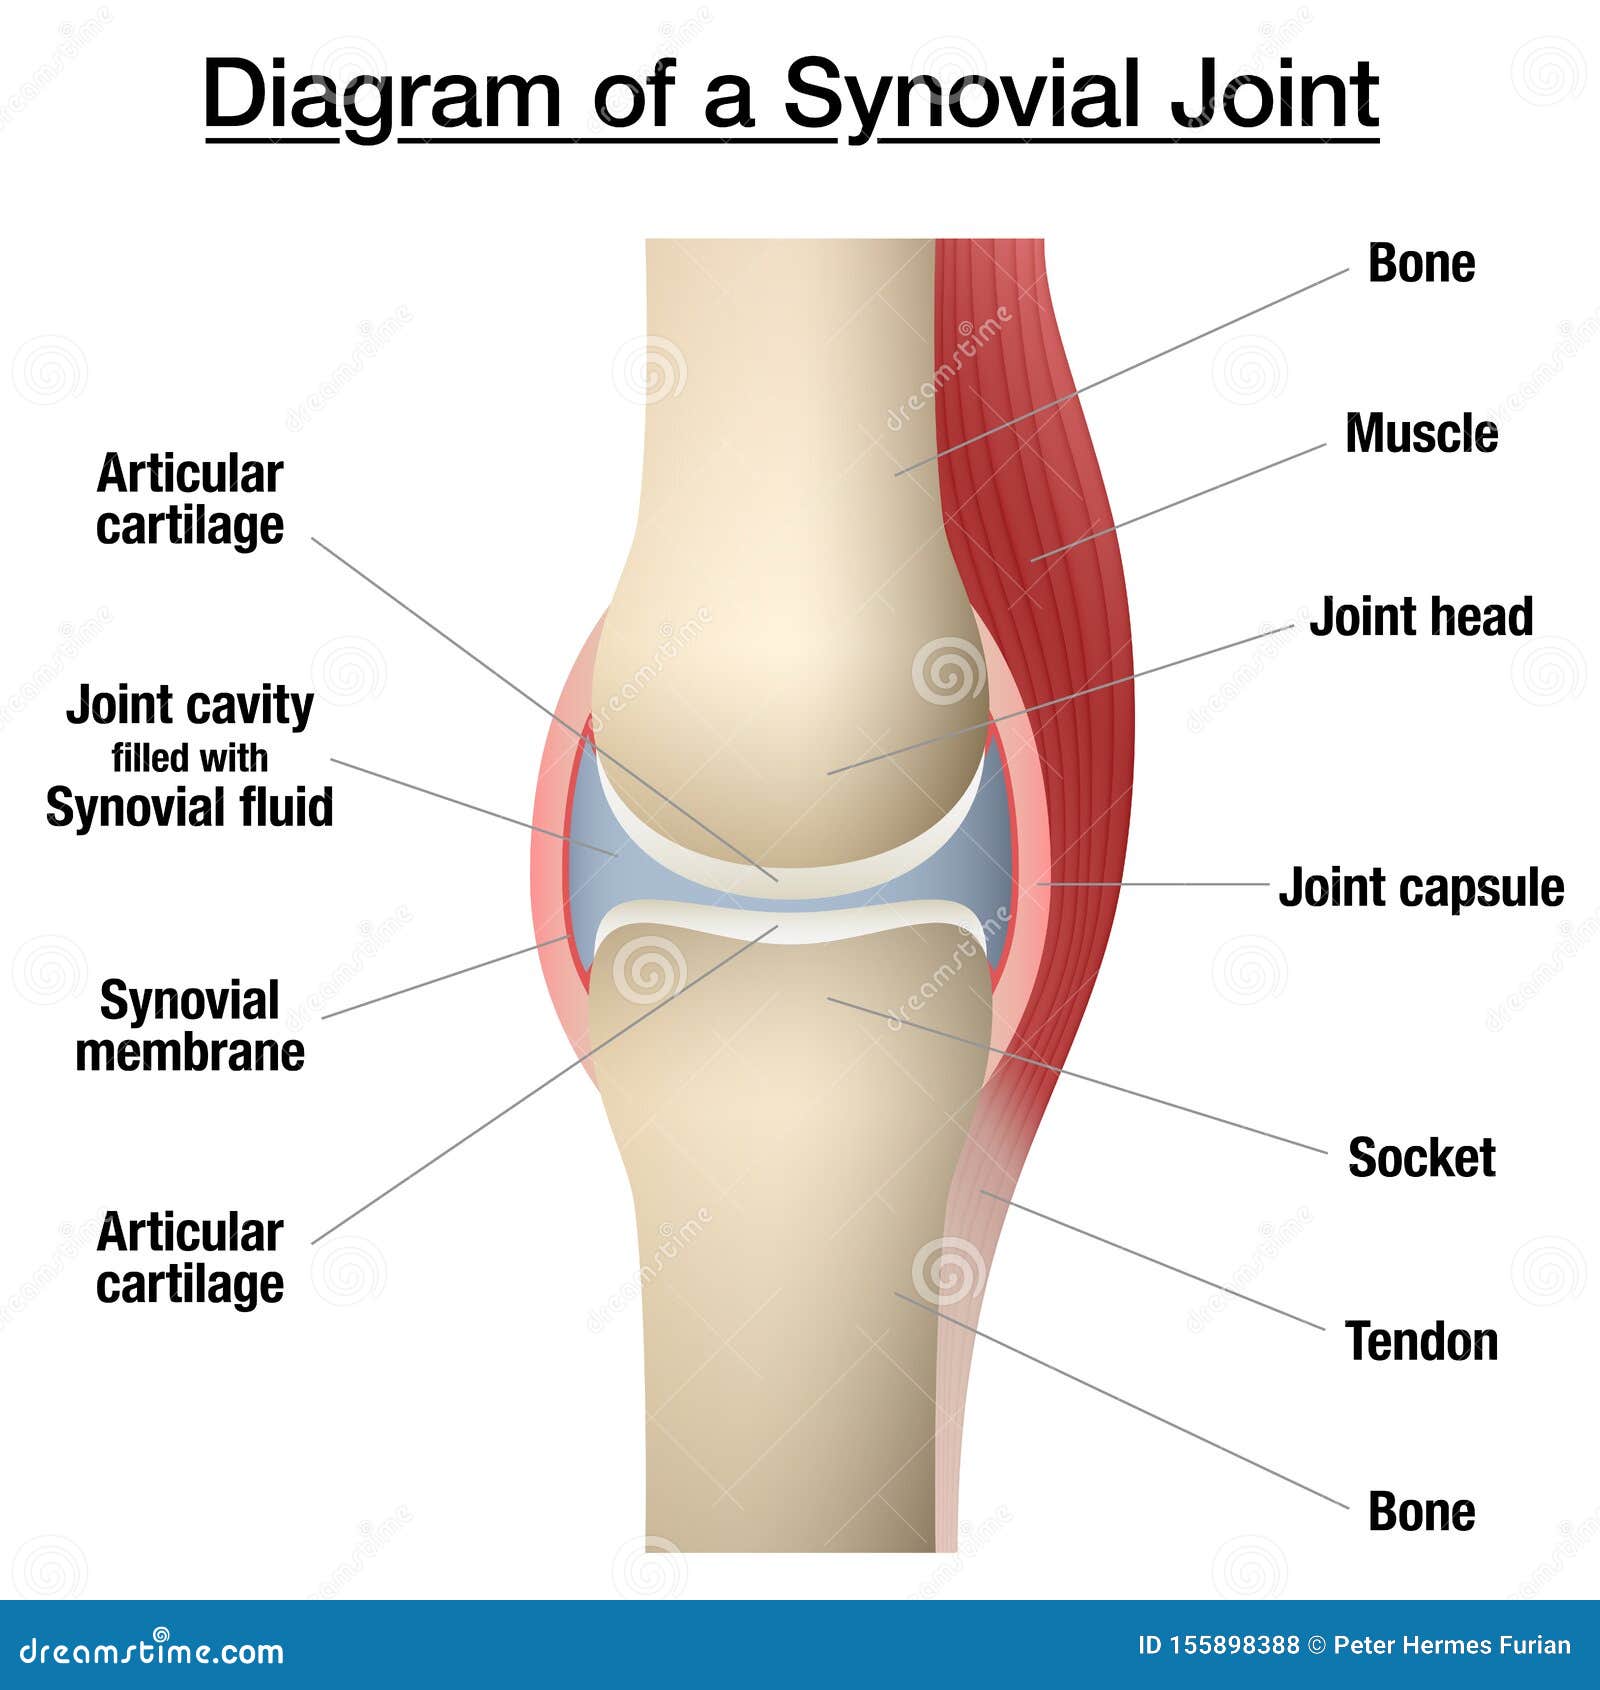 synovial joint capsule bones chart